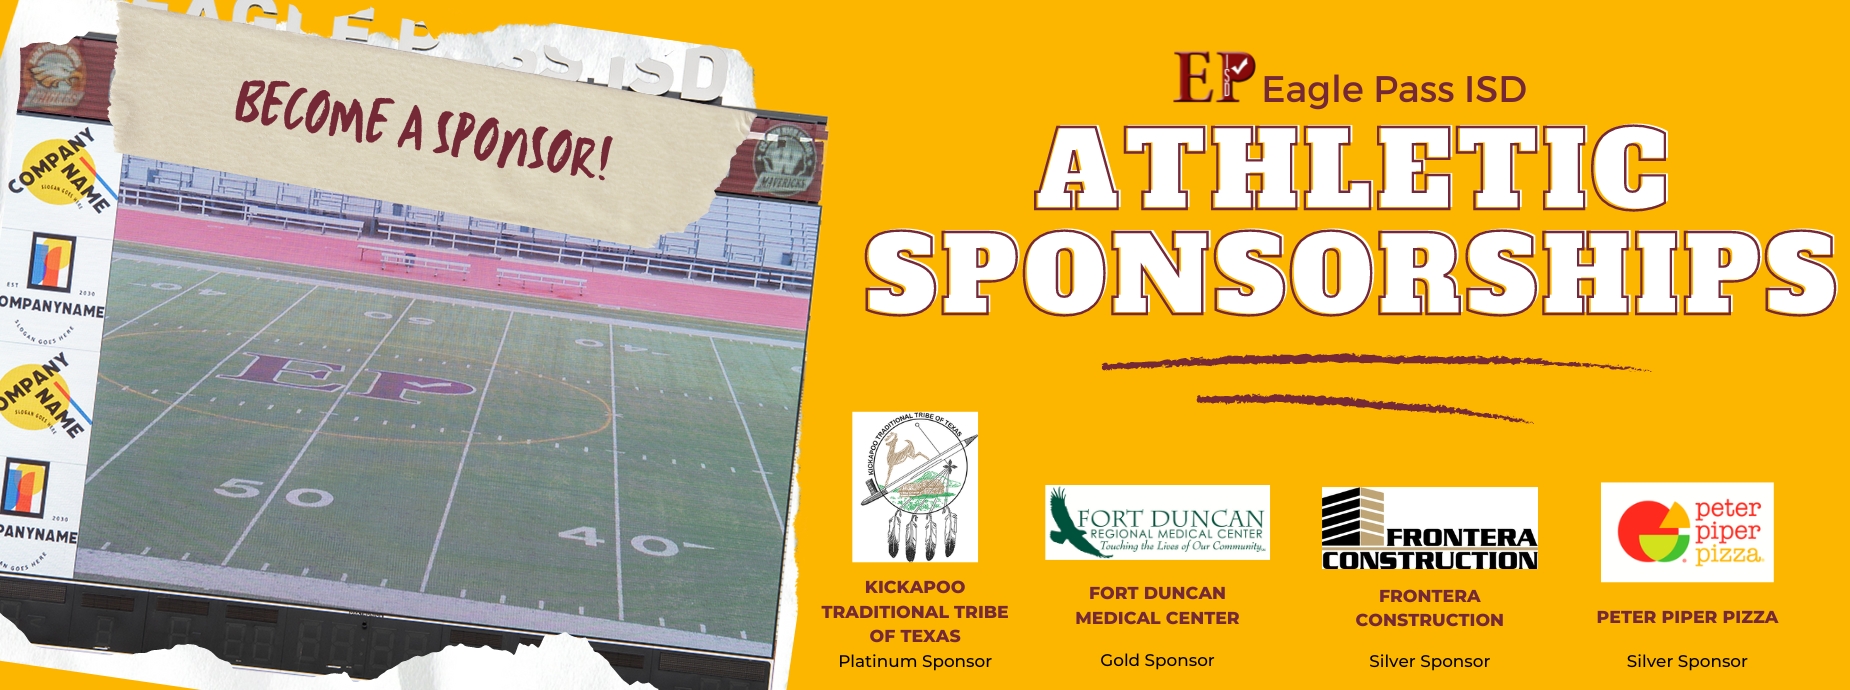 Eagle Pass ISD Athletic Sponorships banner